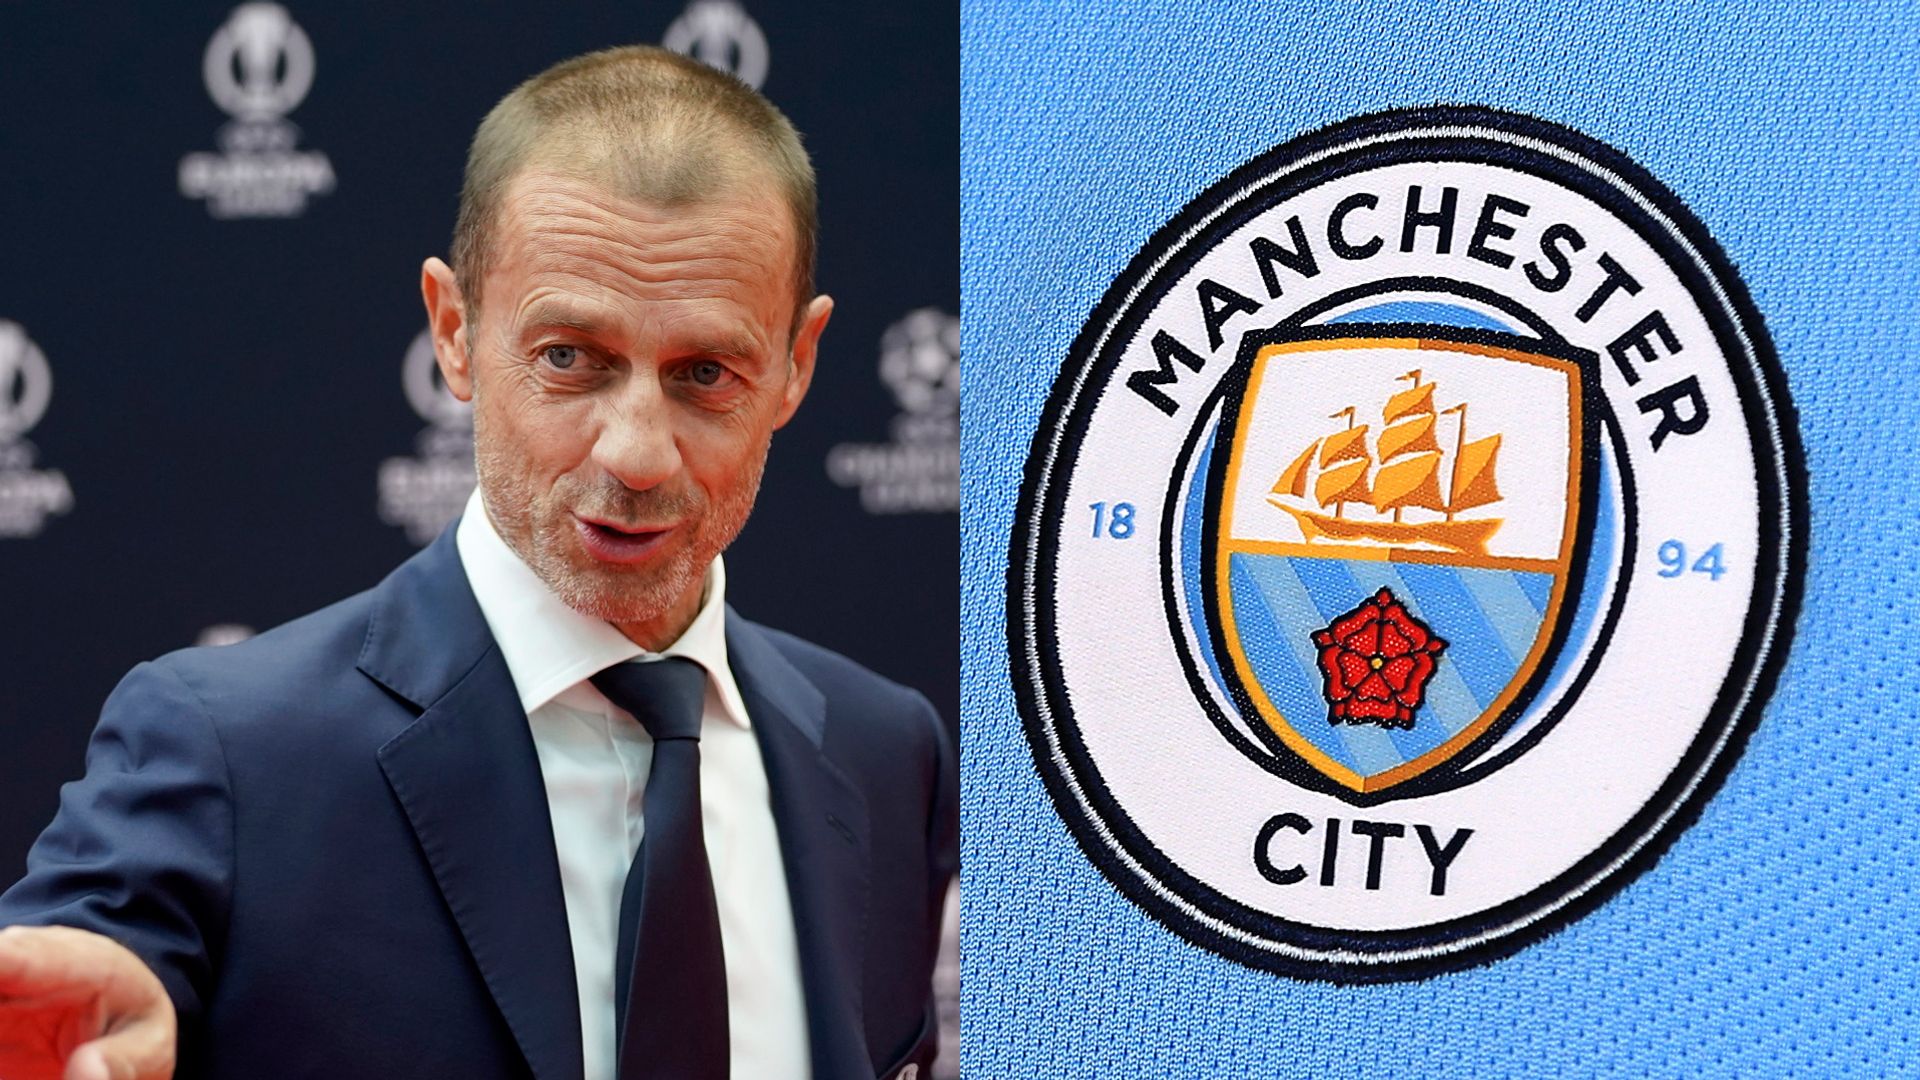 UEFA chief Ceferin: We know we were right about Man City's FFP breach